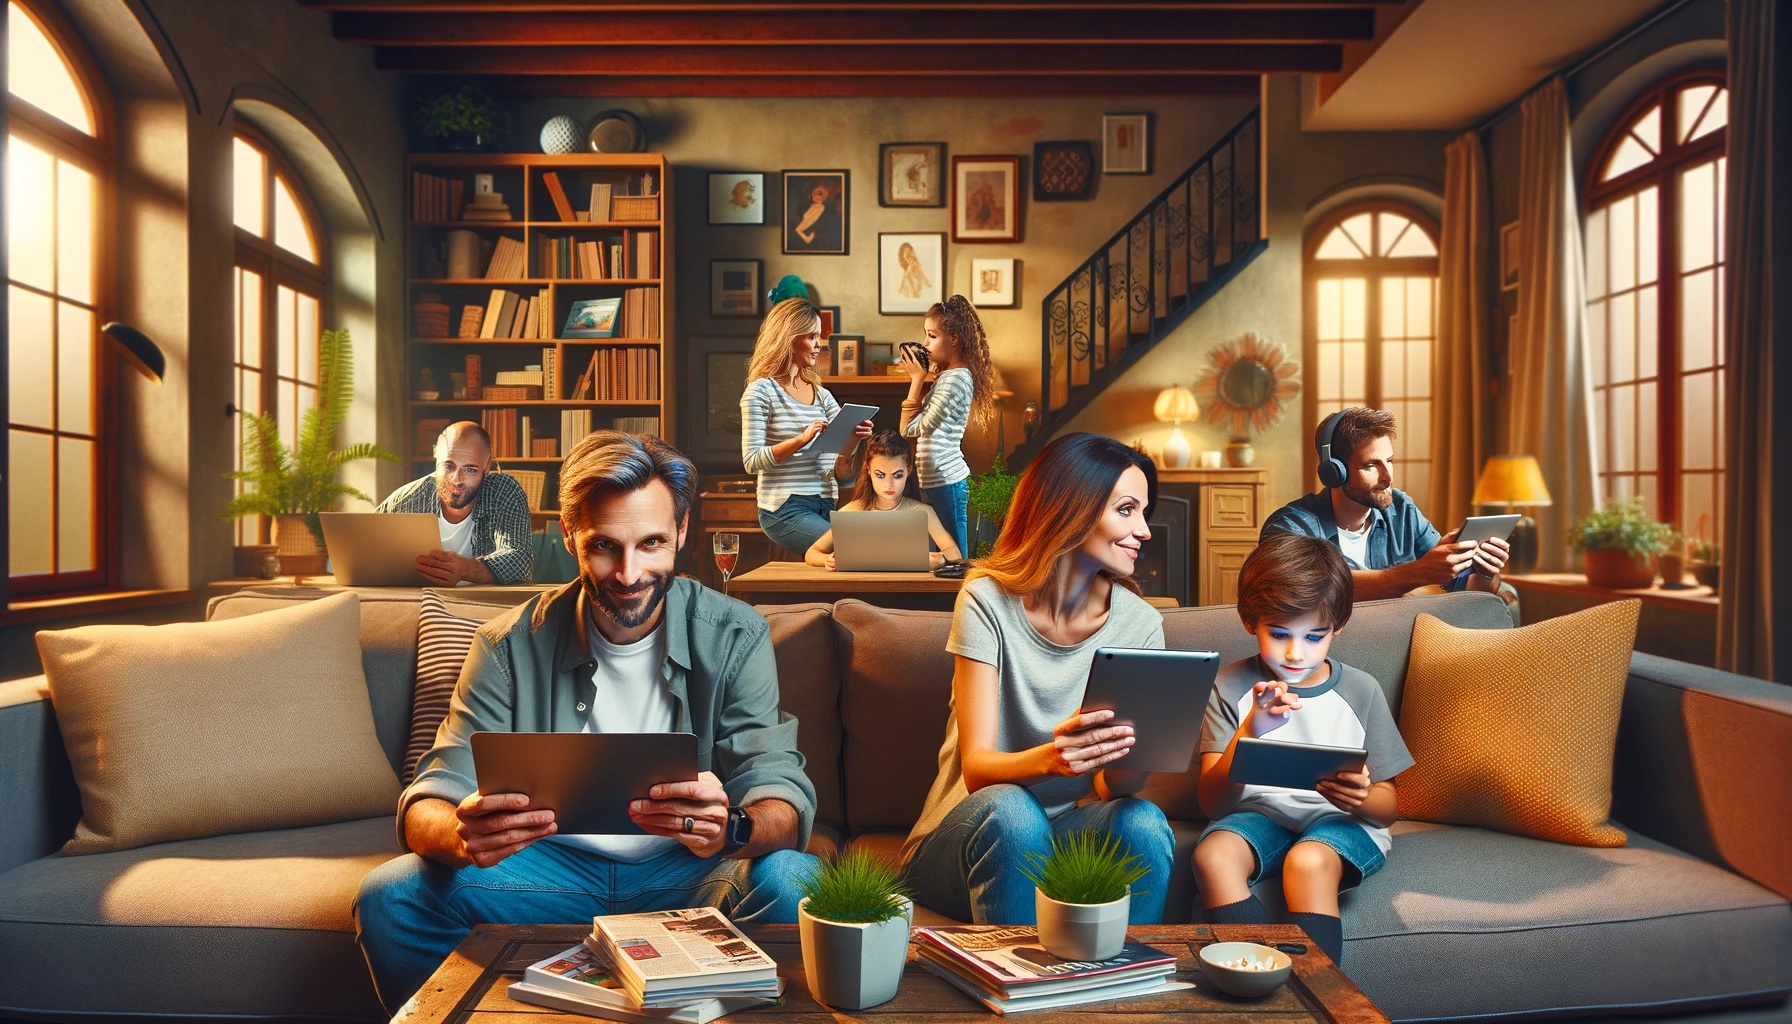 Family at home on their internet network and devices with cybersecurity and privacy.